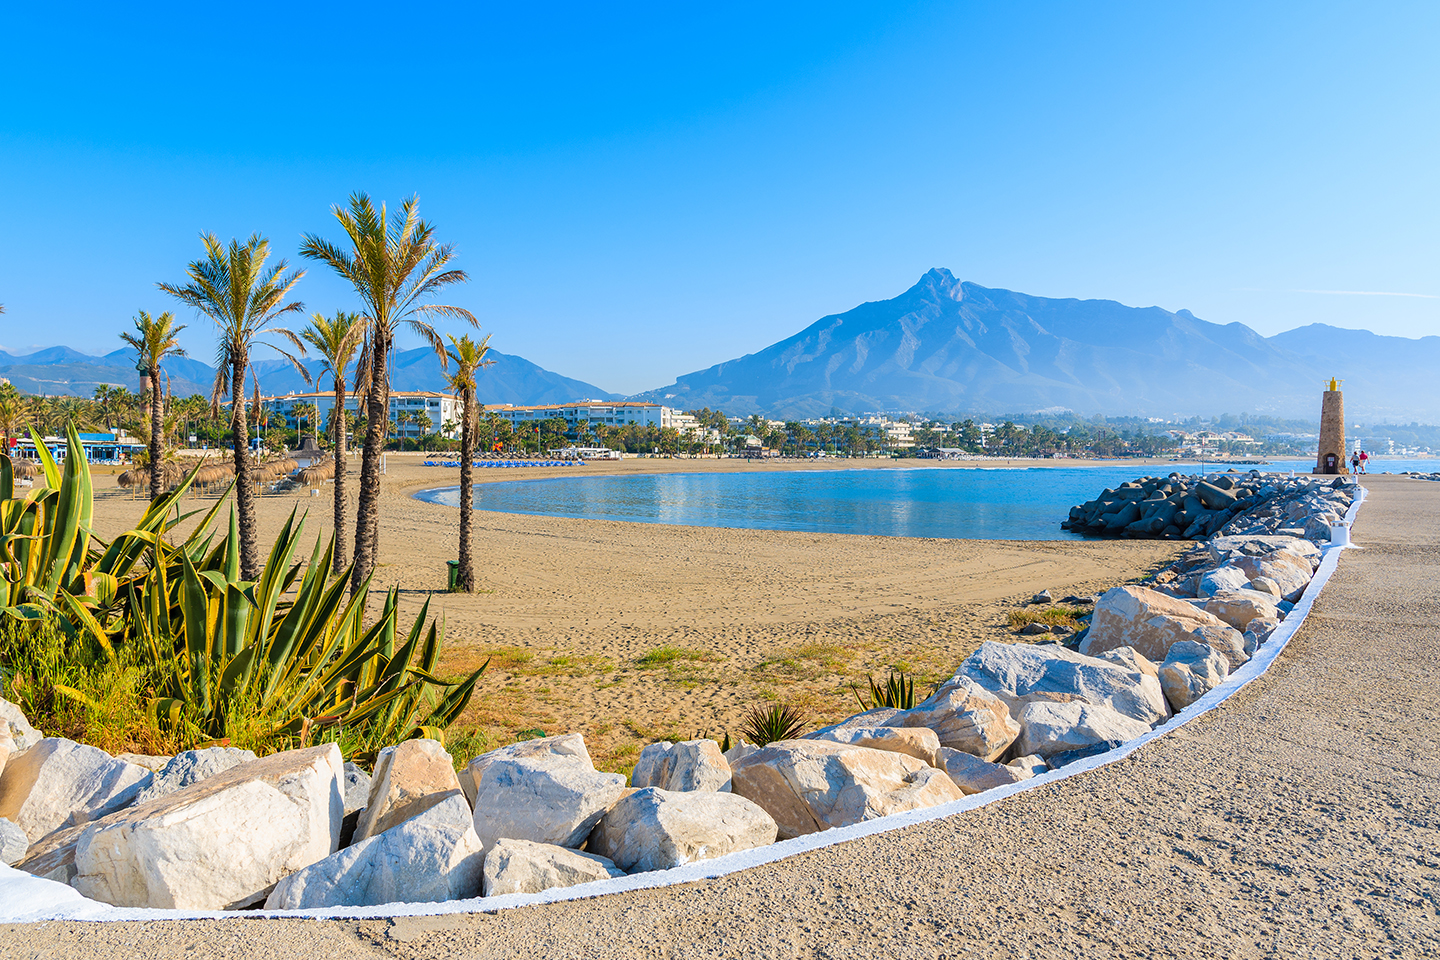 A beach in Marbella, Spain, with palm trees on the left, a walkway on the right, and a mountain in the distance.